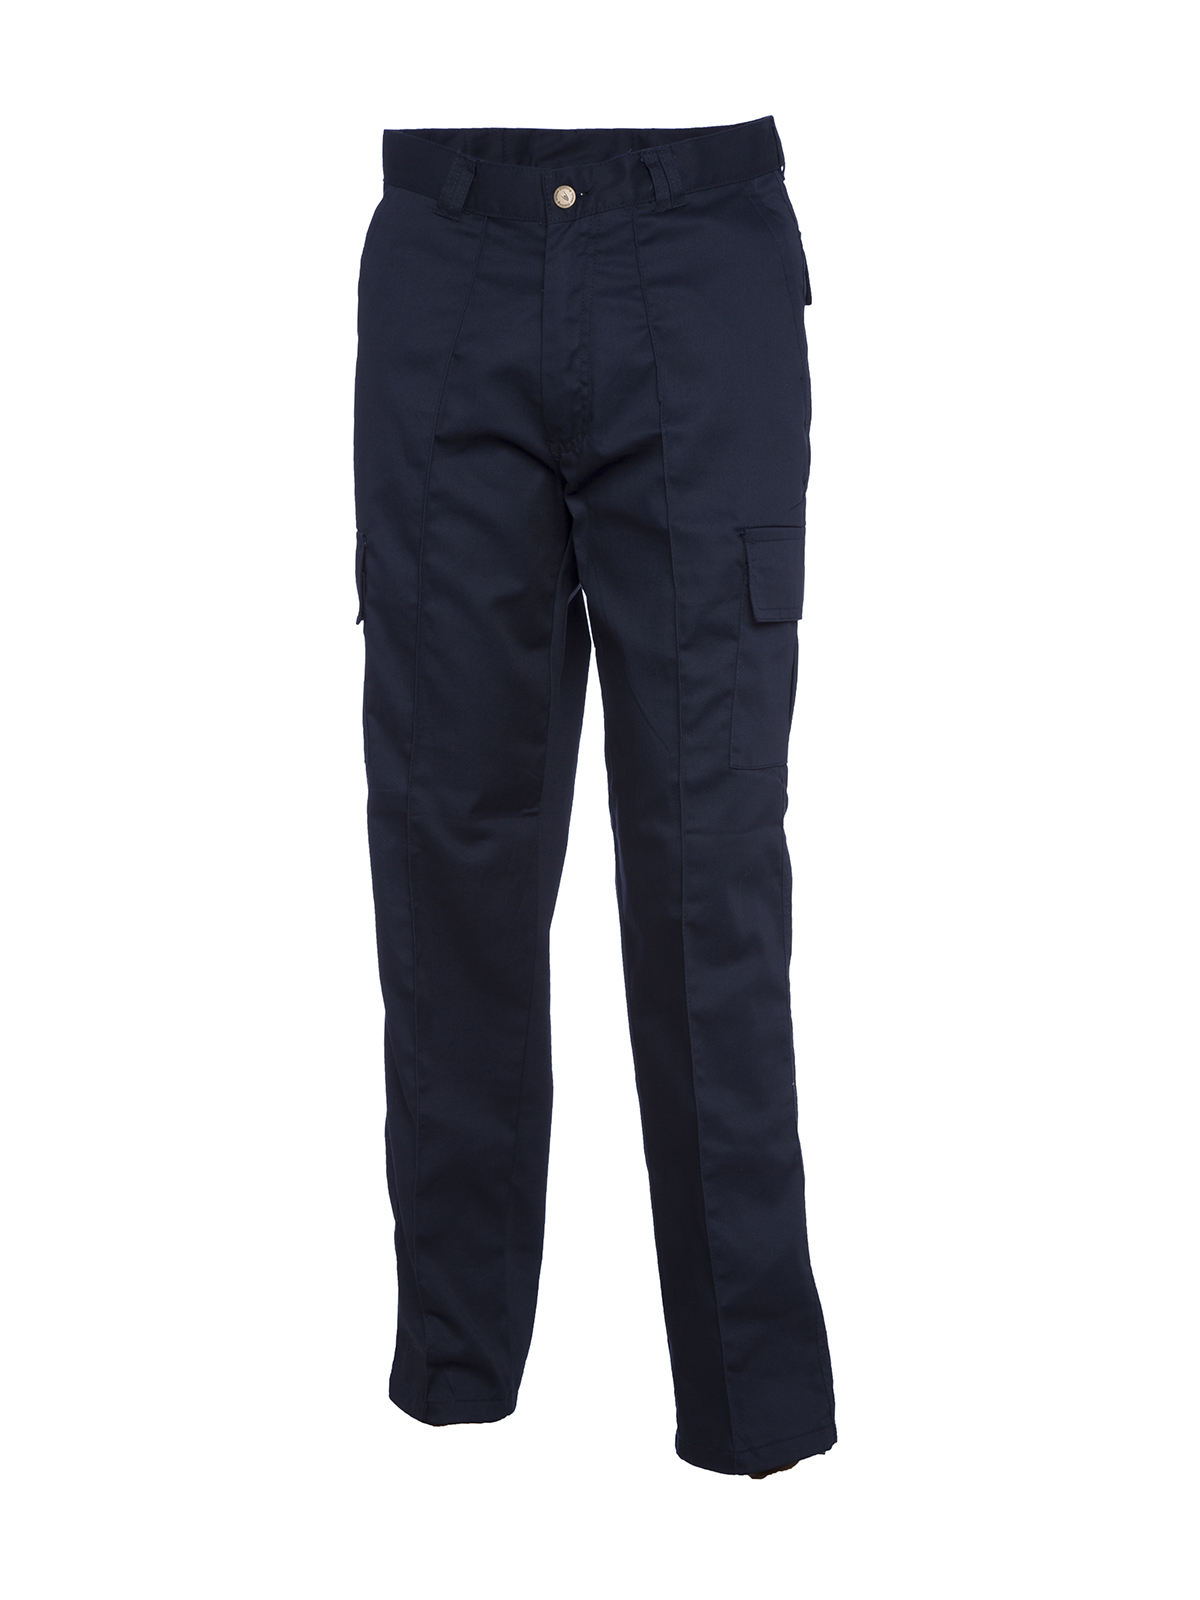 Cargo Trousers, Navy Blue - 40R